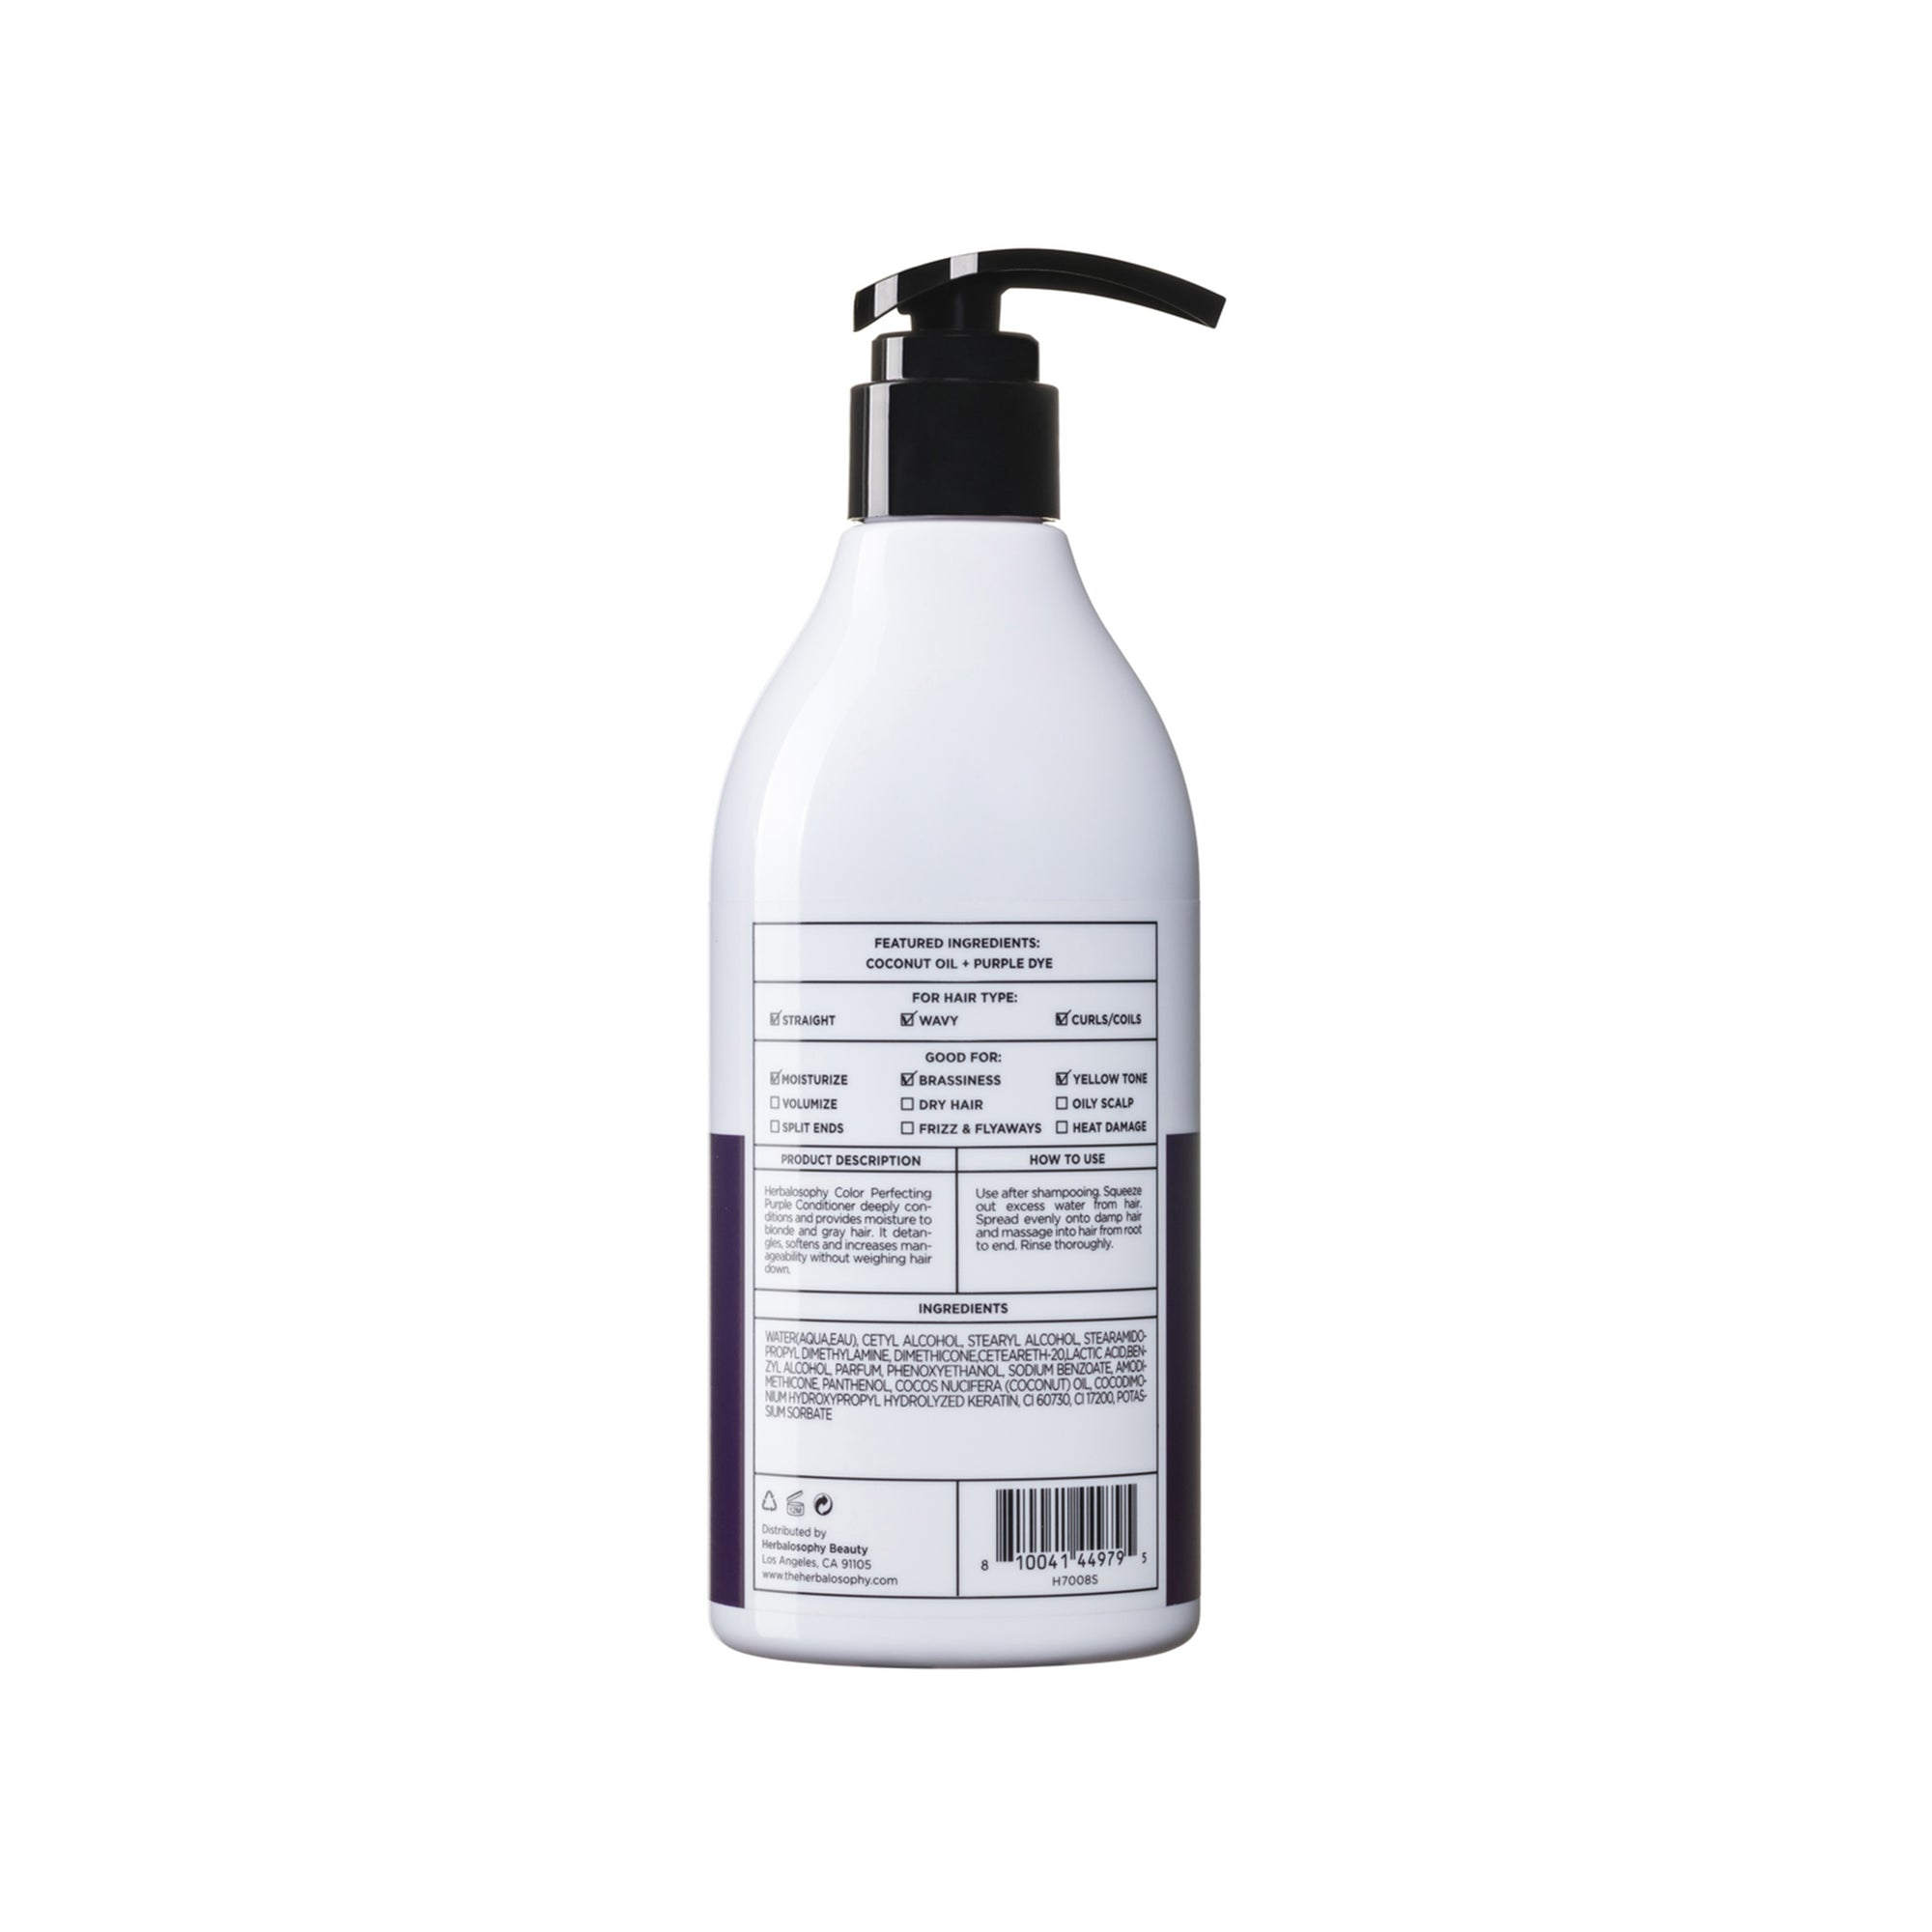 Herbalosophy Color Perfecting Purple Conditioner bottle back